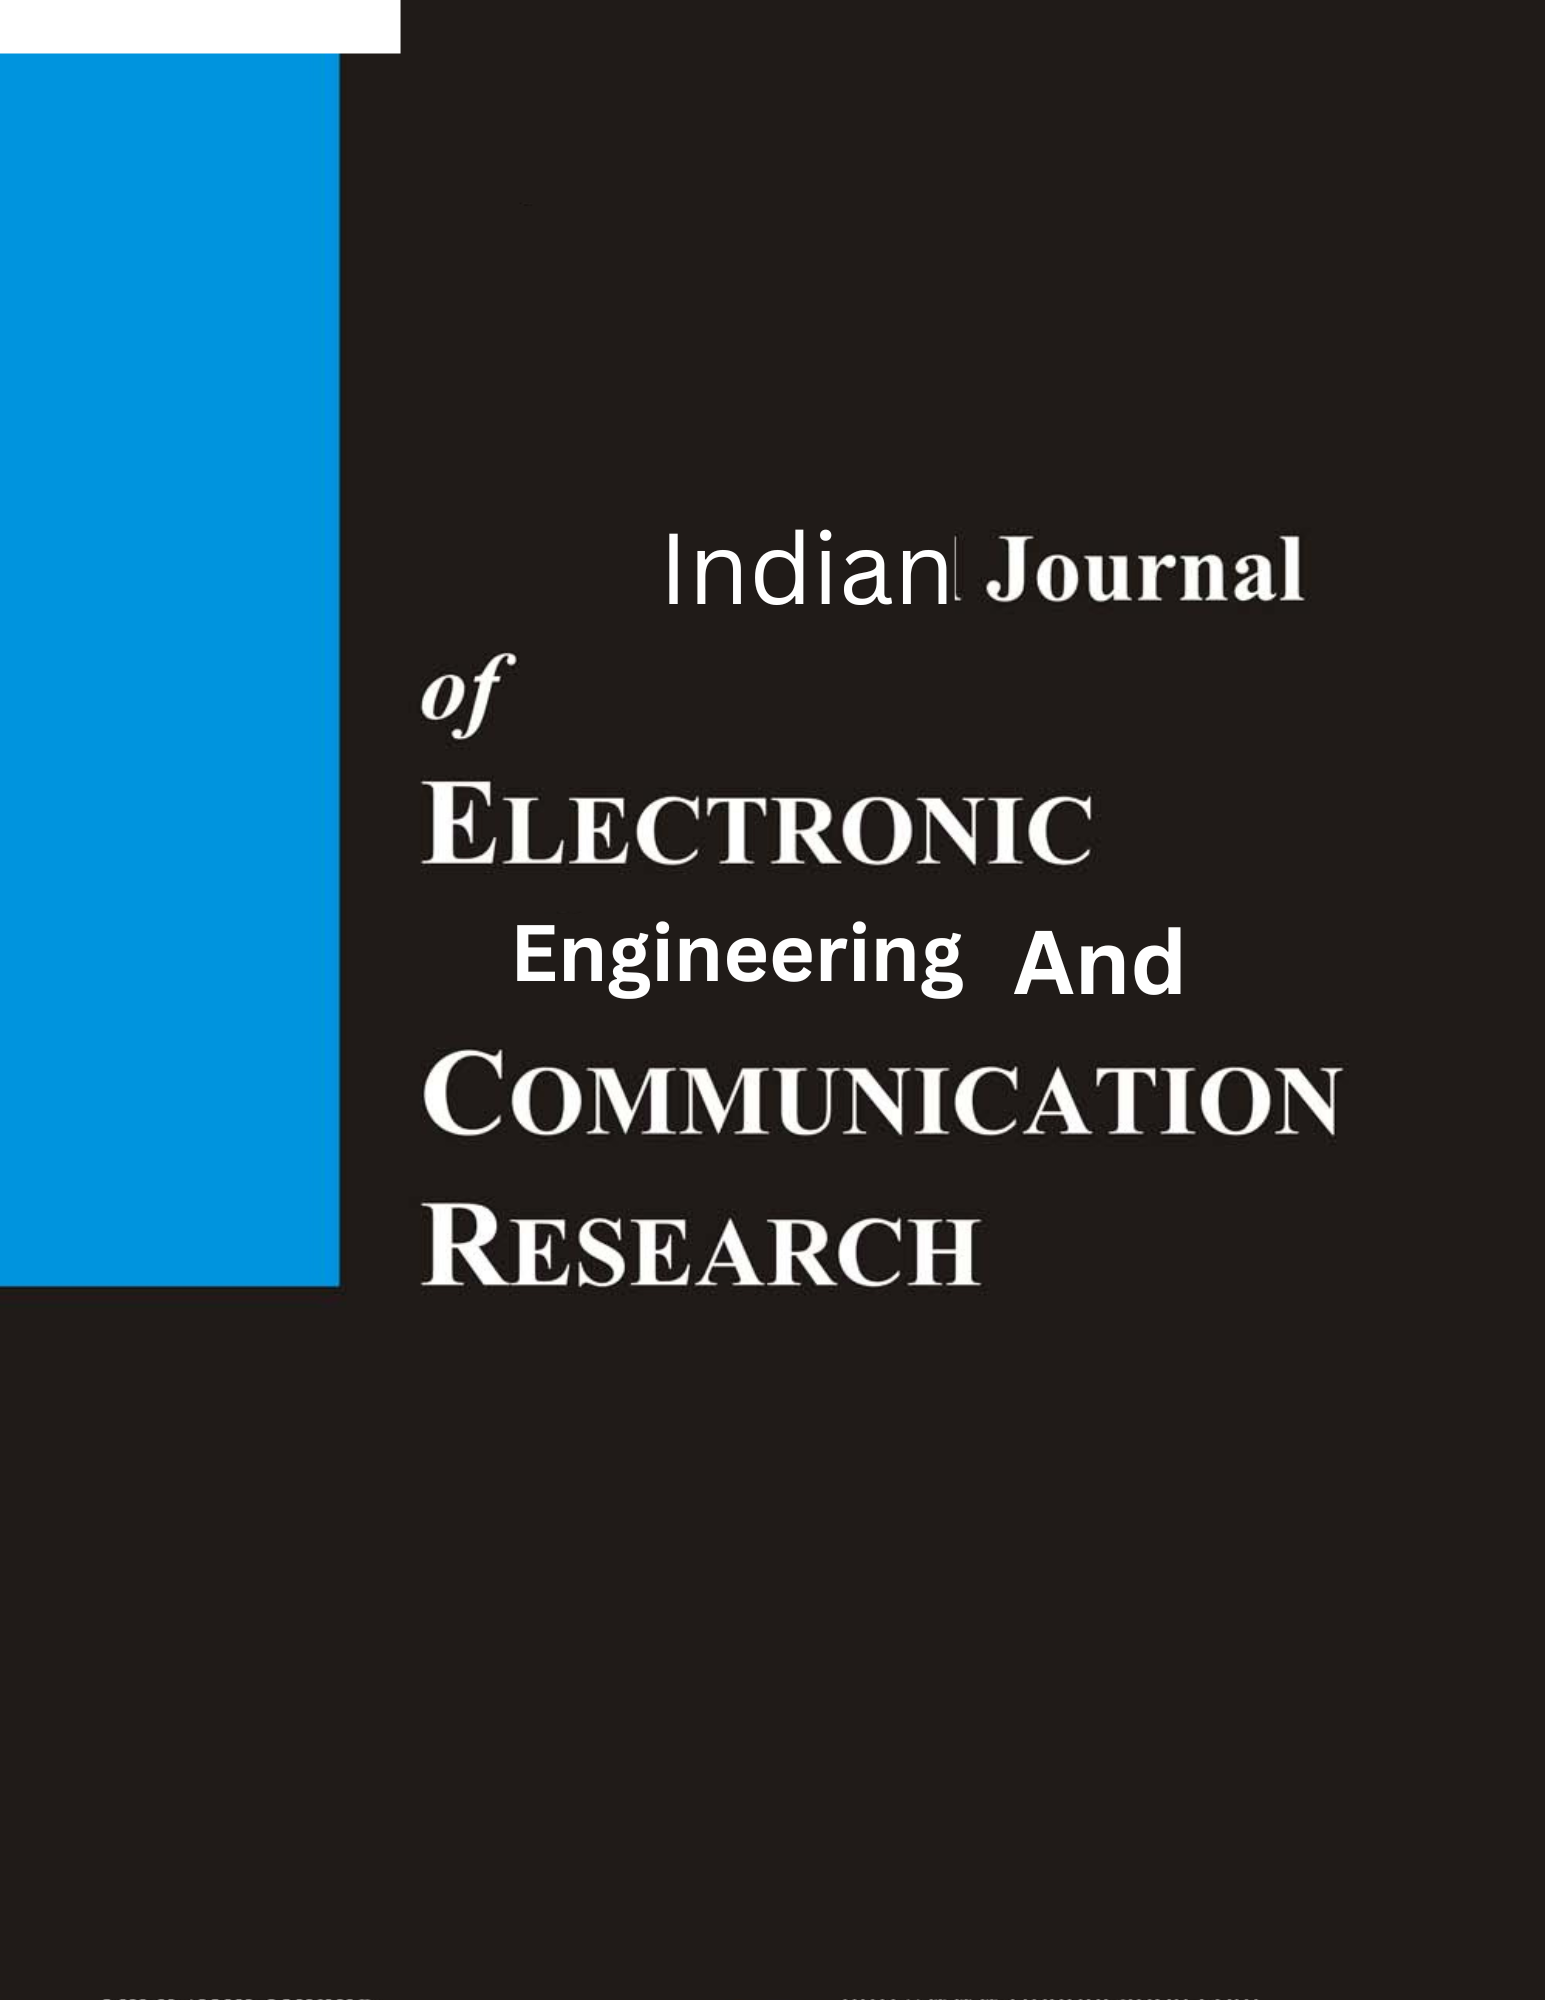 Indian Journal of Electronic Engineering and Communication Research